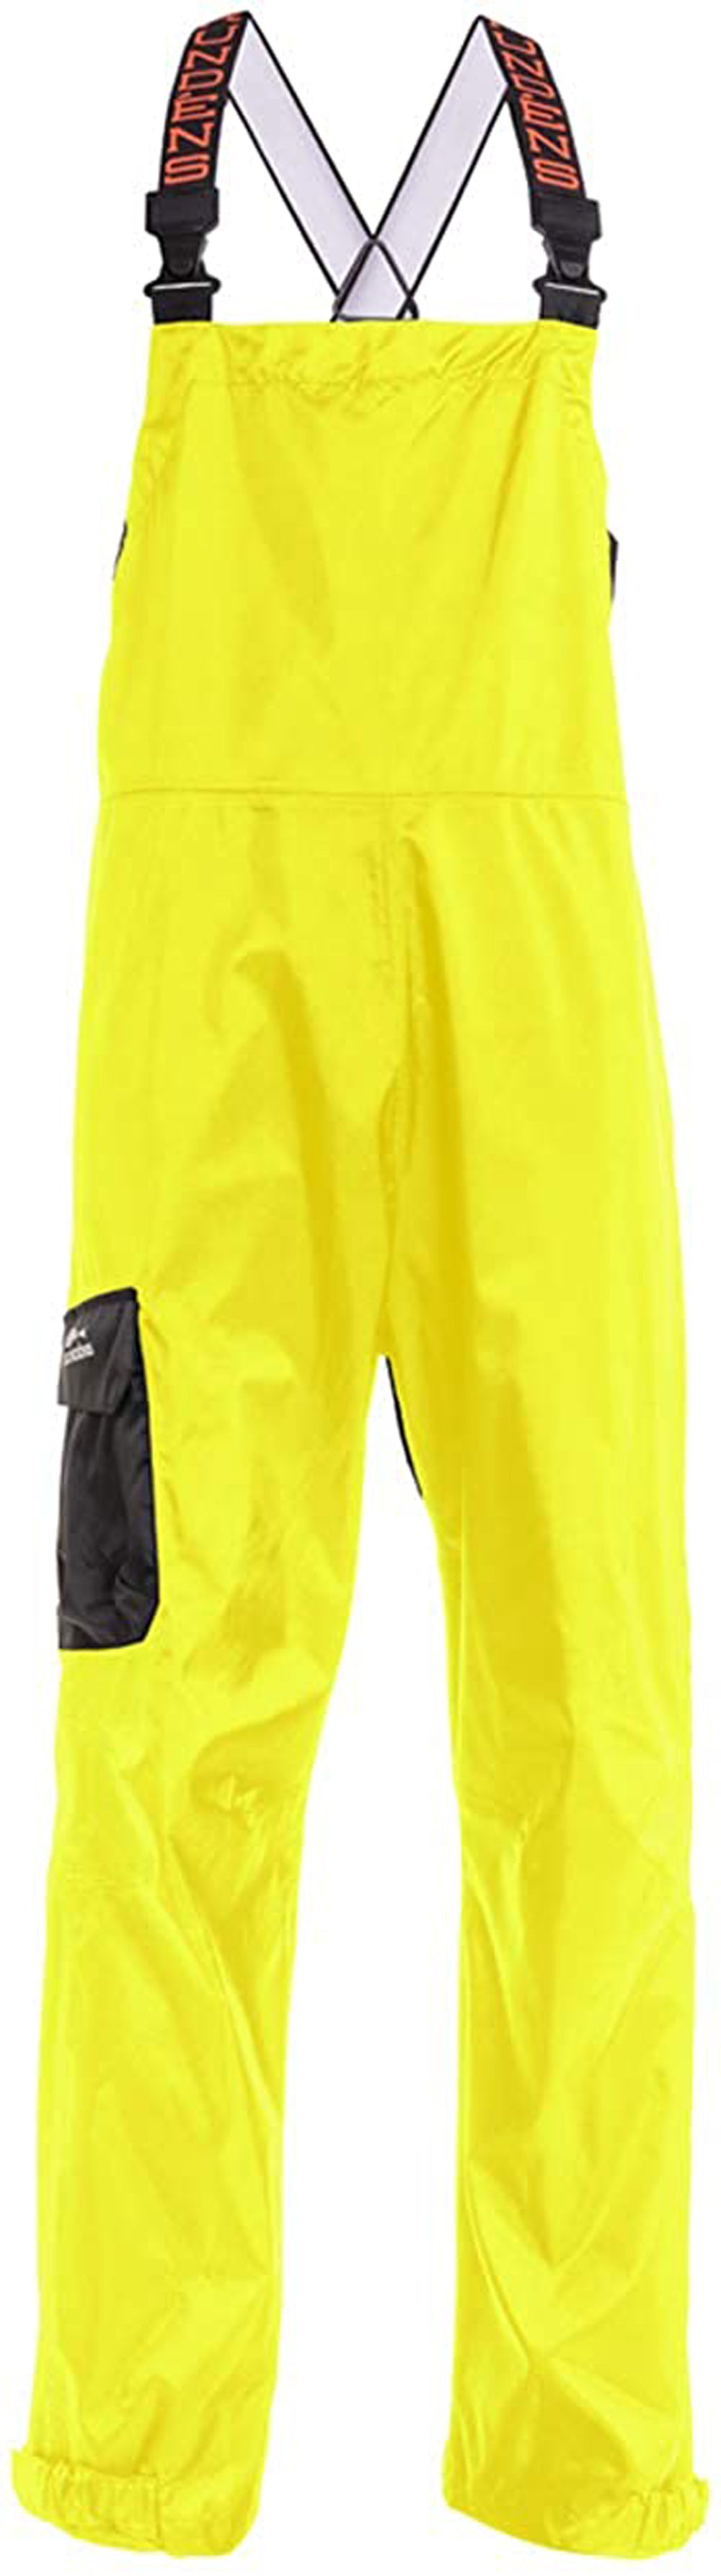 Weather Watch Bib in Hi Vis Yellow color from the front view